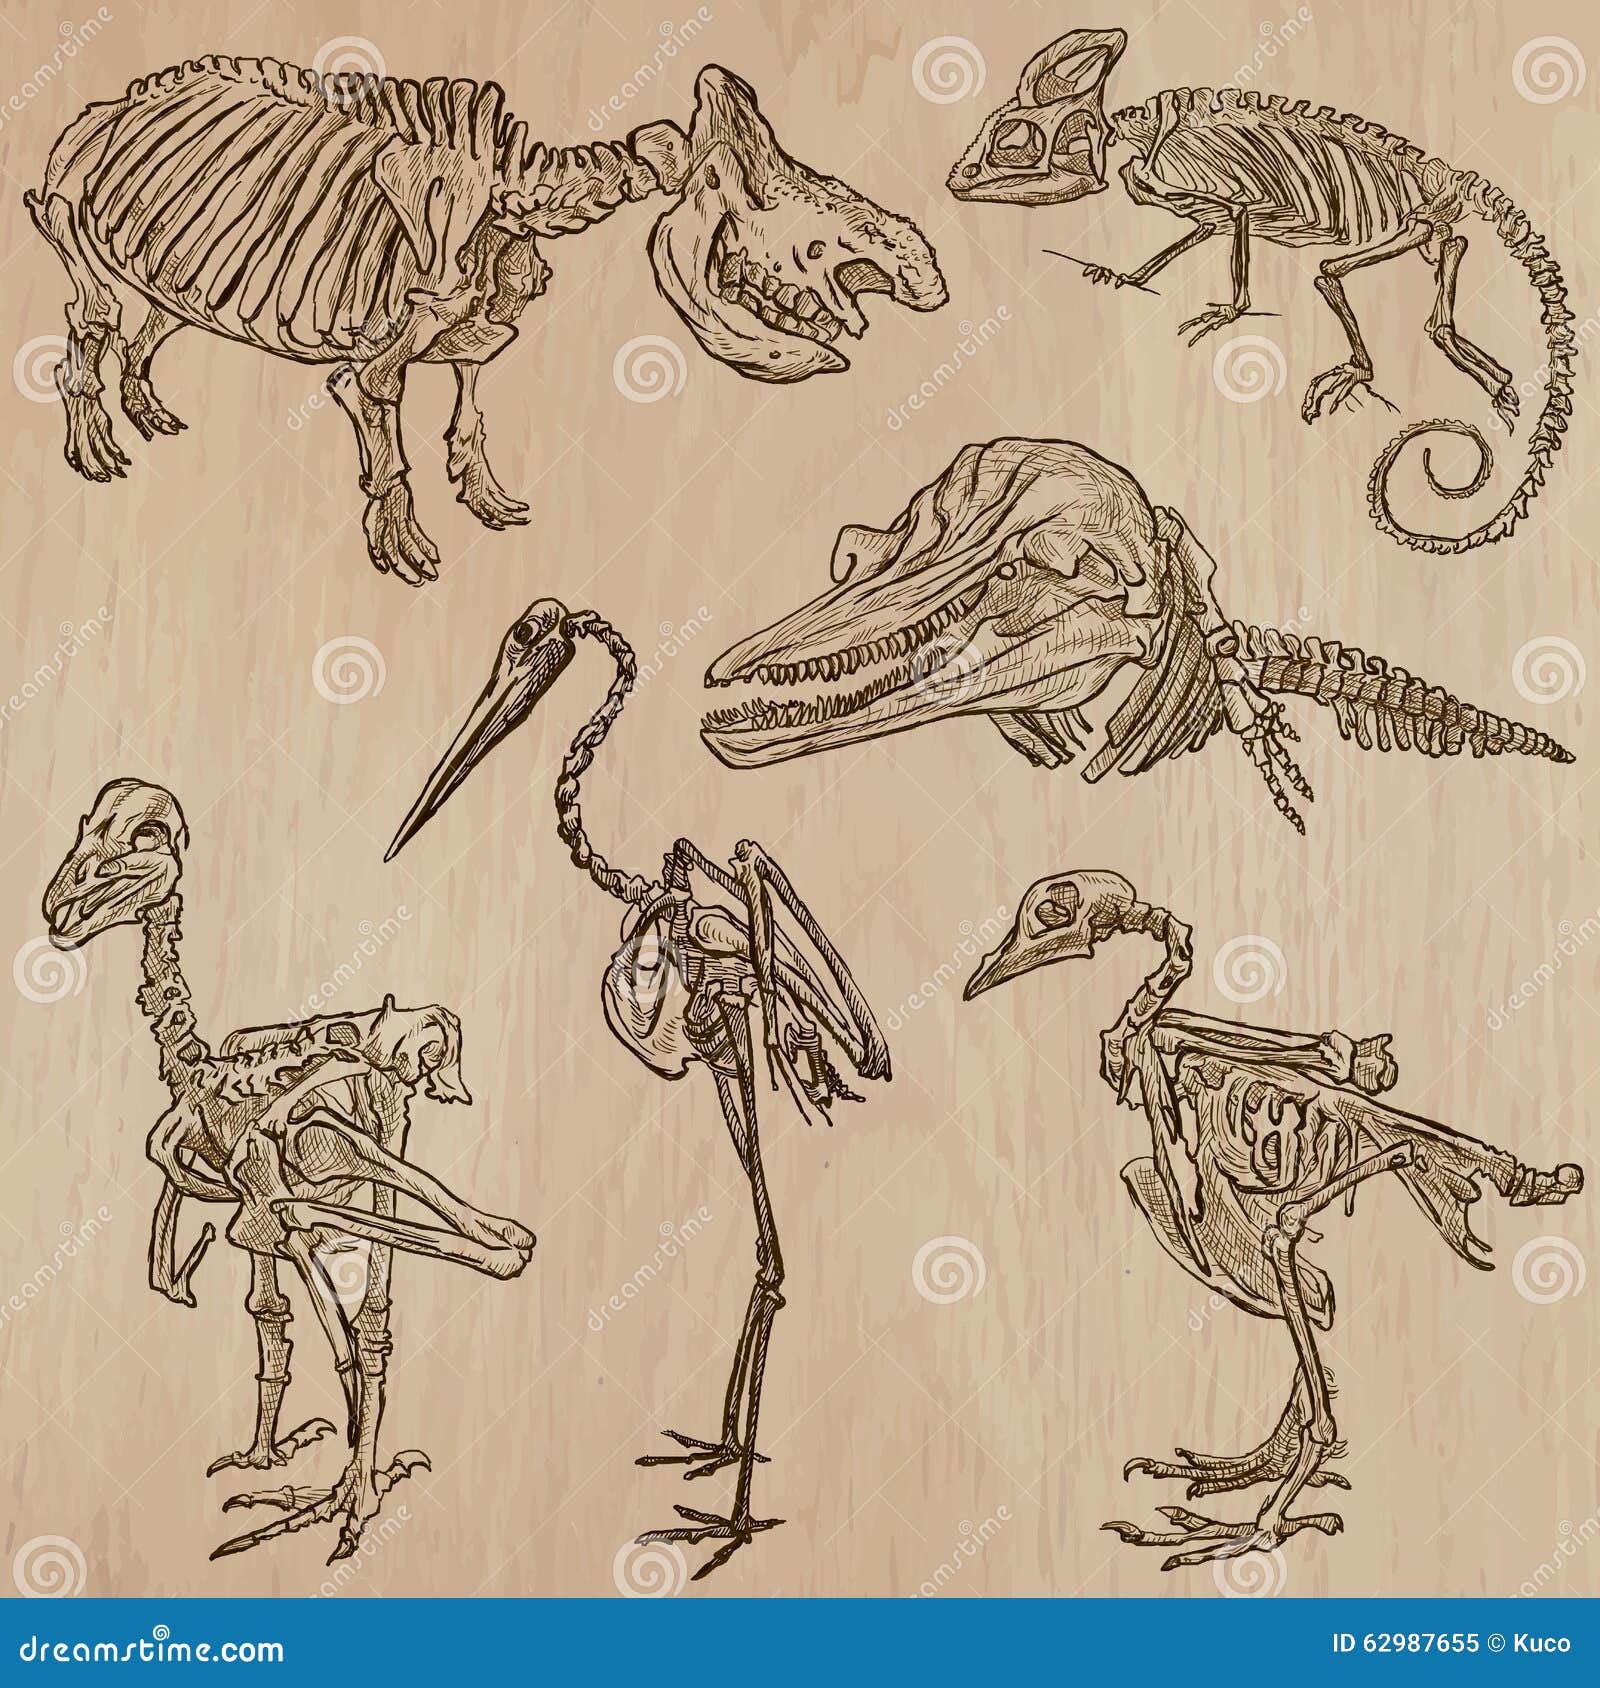 Bones, Skulls, Skeletons - freehands, vector. BONES, SKELETONS and Skulls of some Animals. Collection of an hand drawn vector illustrations. Freehand sketching. Each drawing comprise a few layers of lines. Background is isolated. Editable in groups.